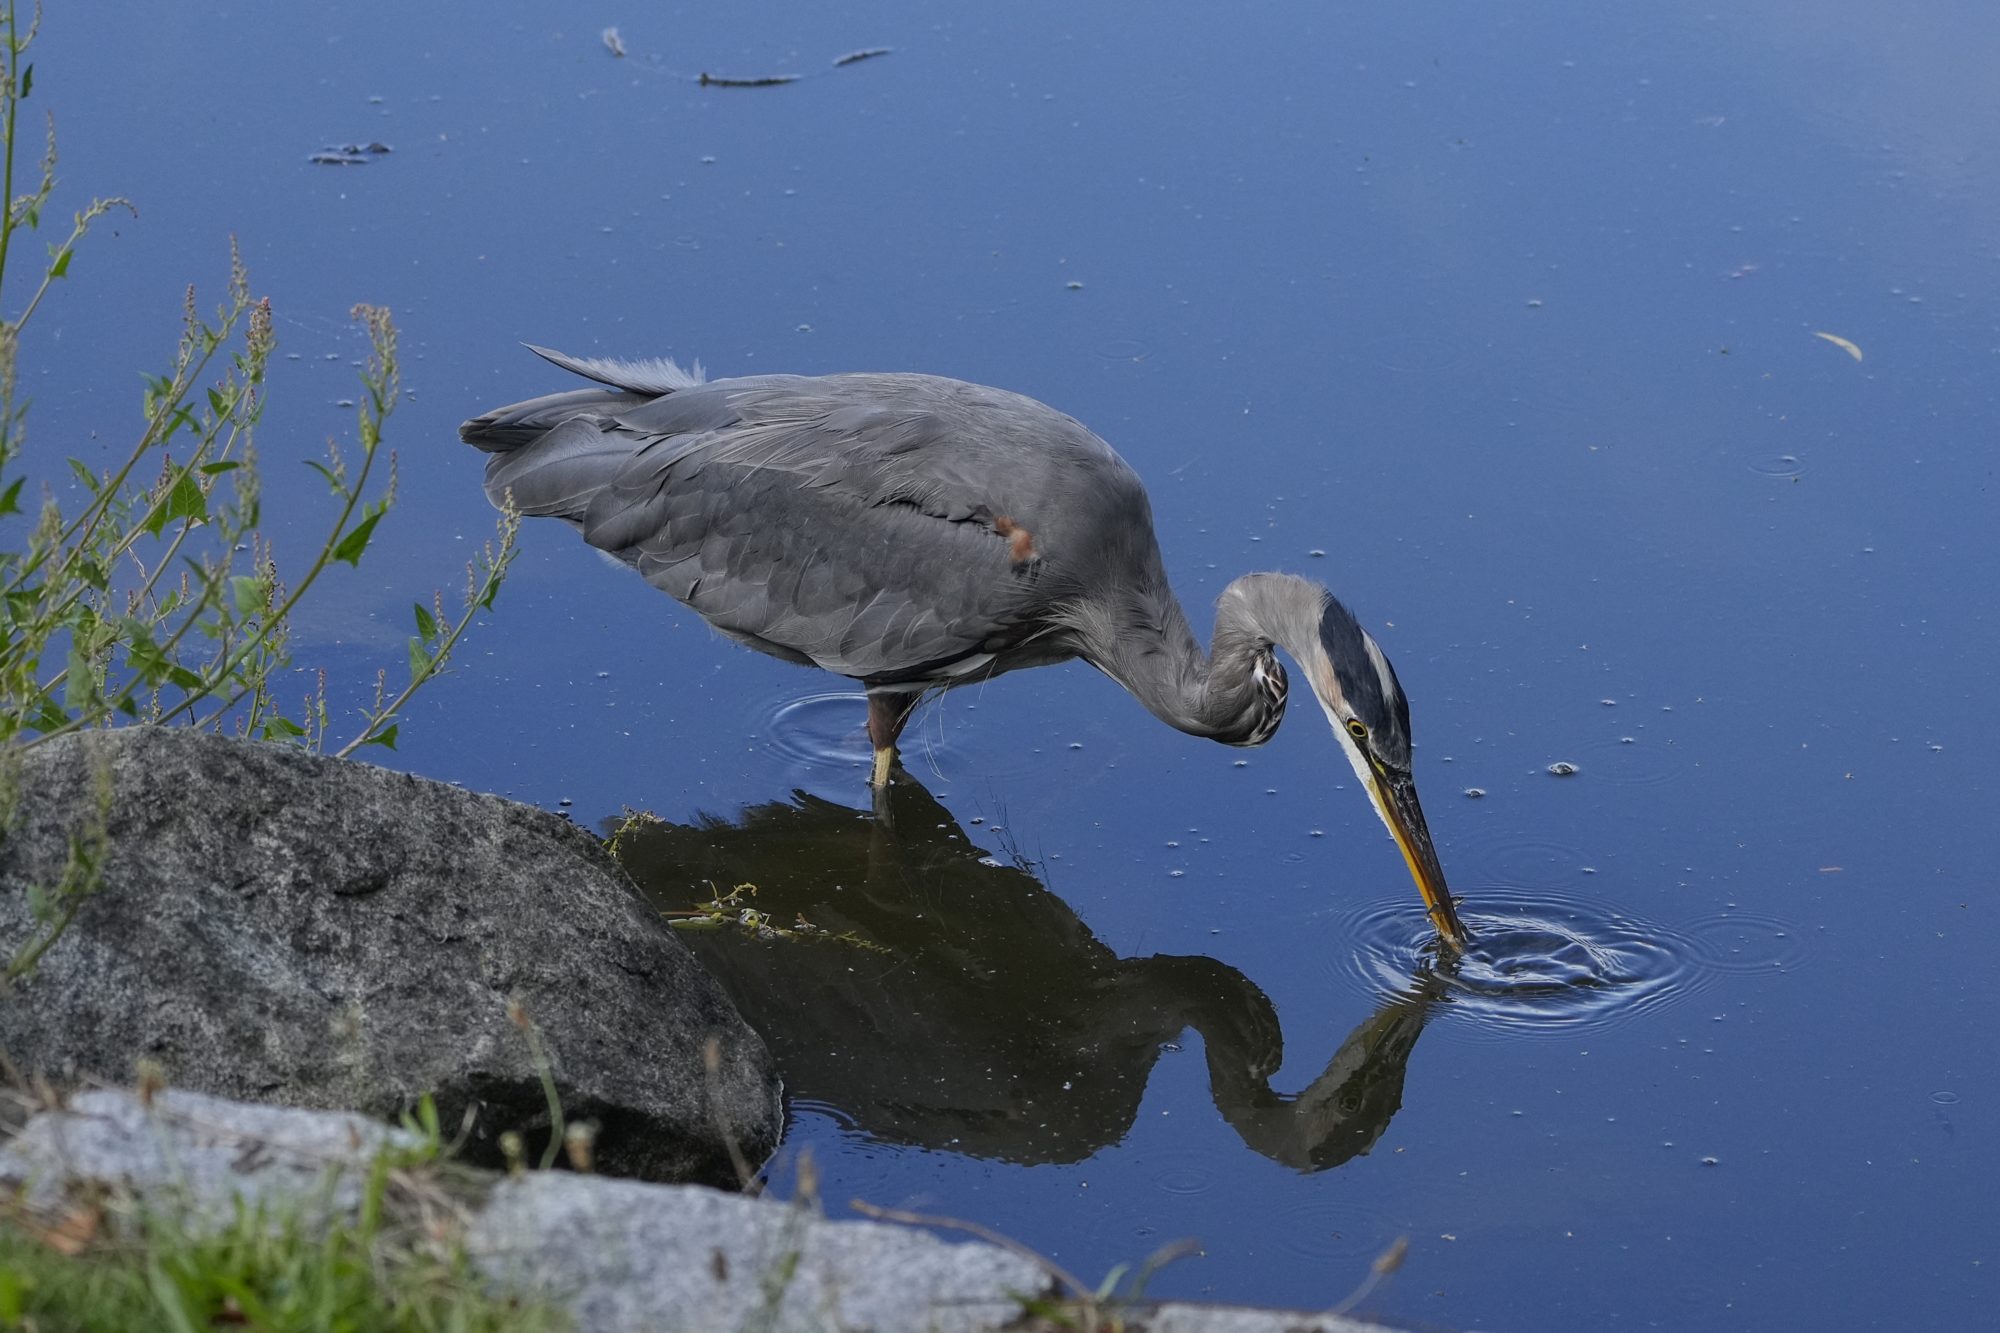 A Great Blue Heron standing in shallow water has a tiny fish in its beak